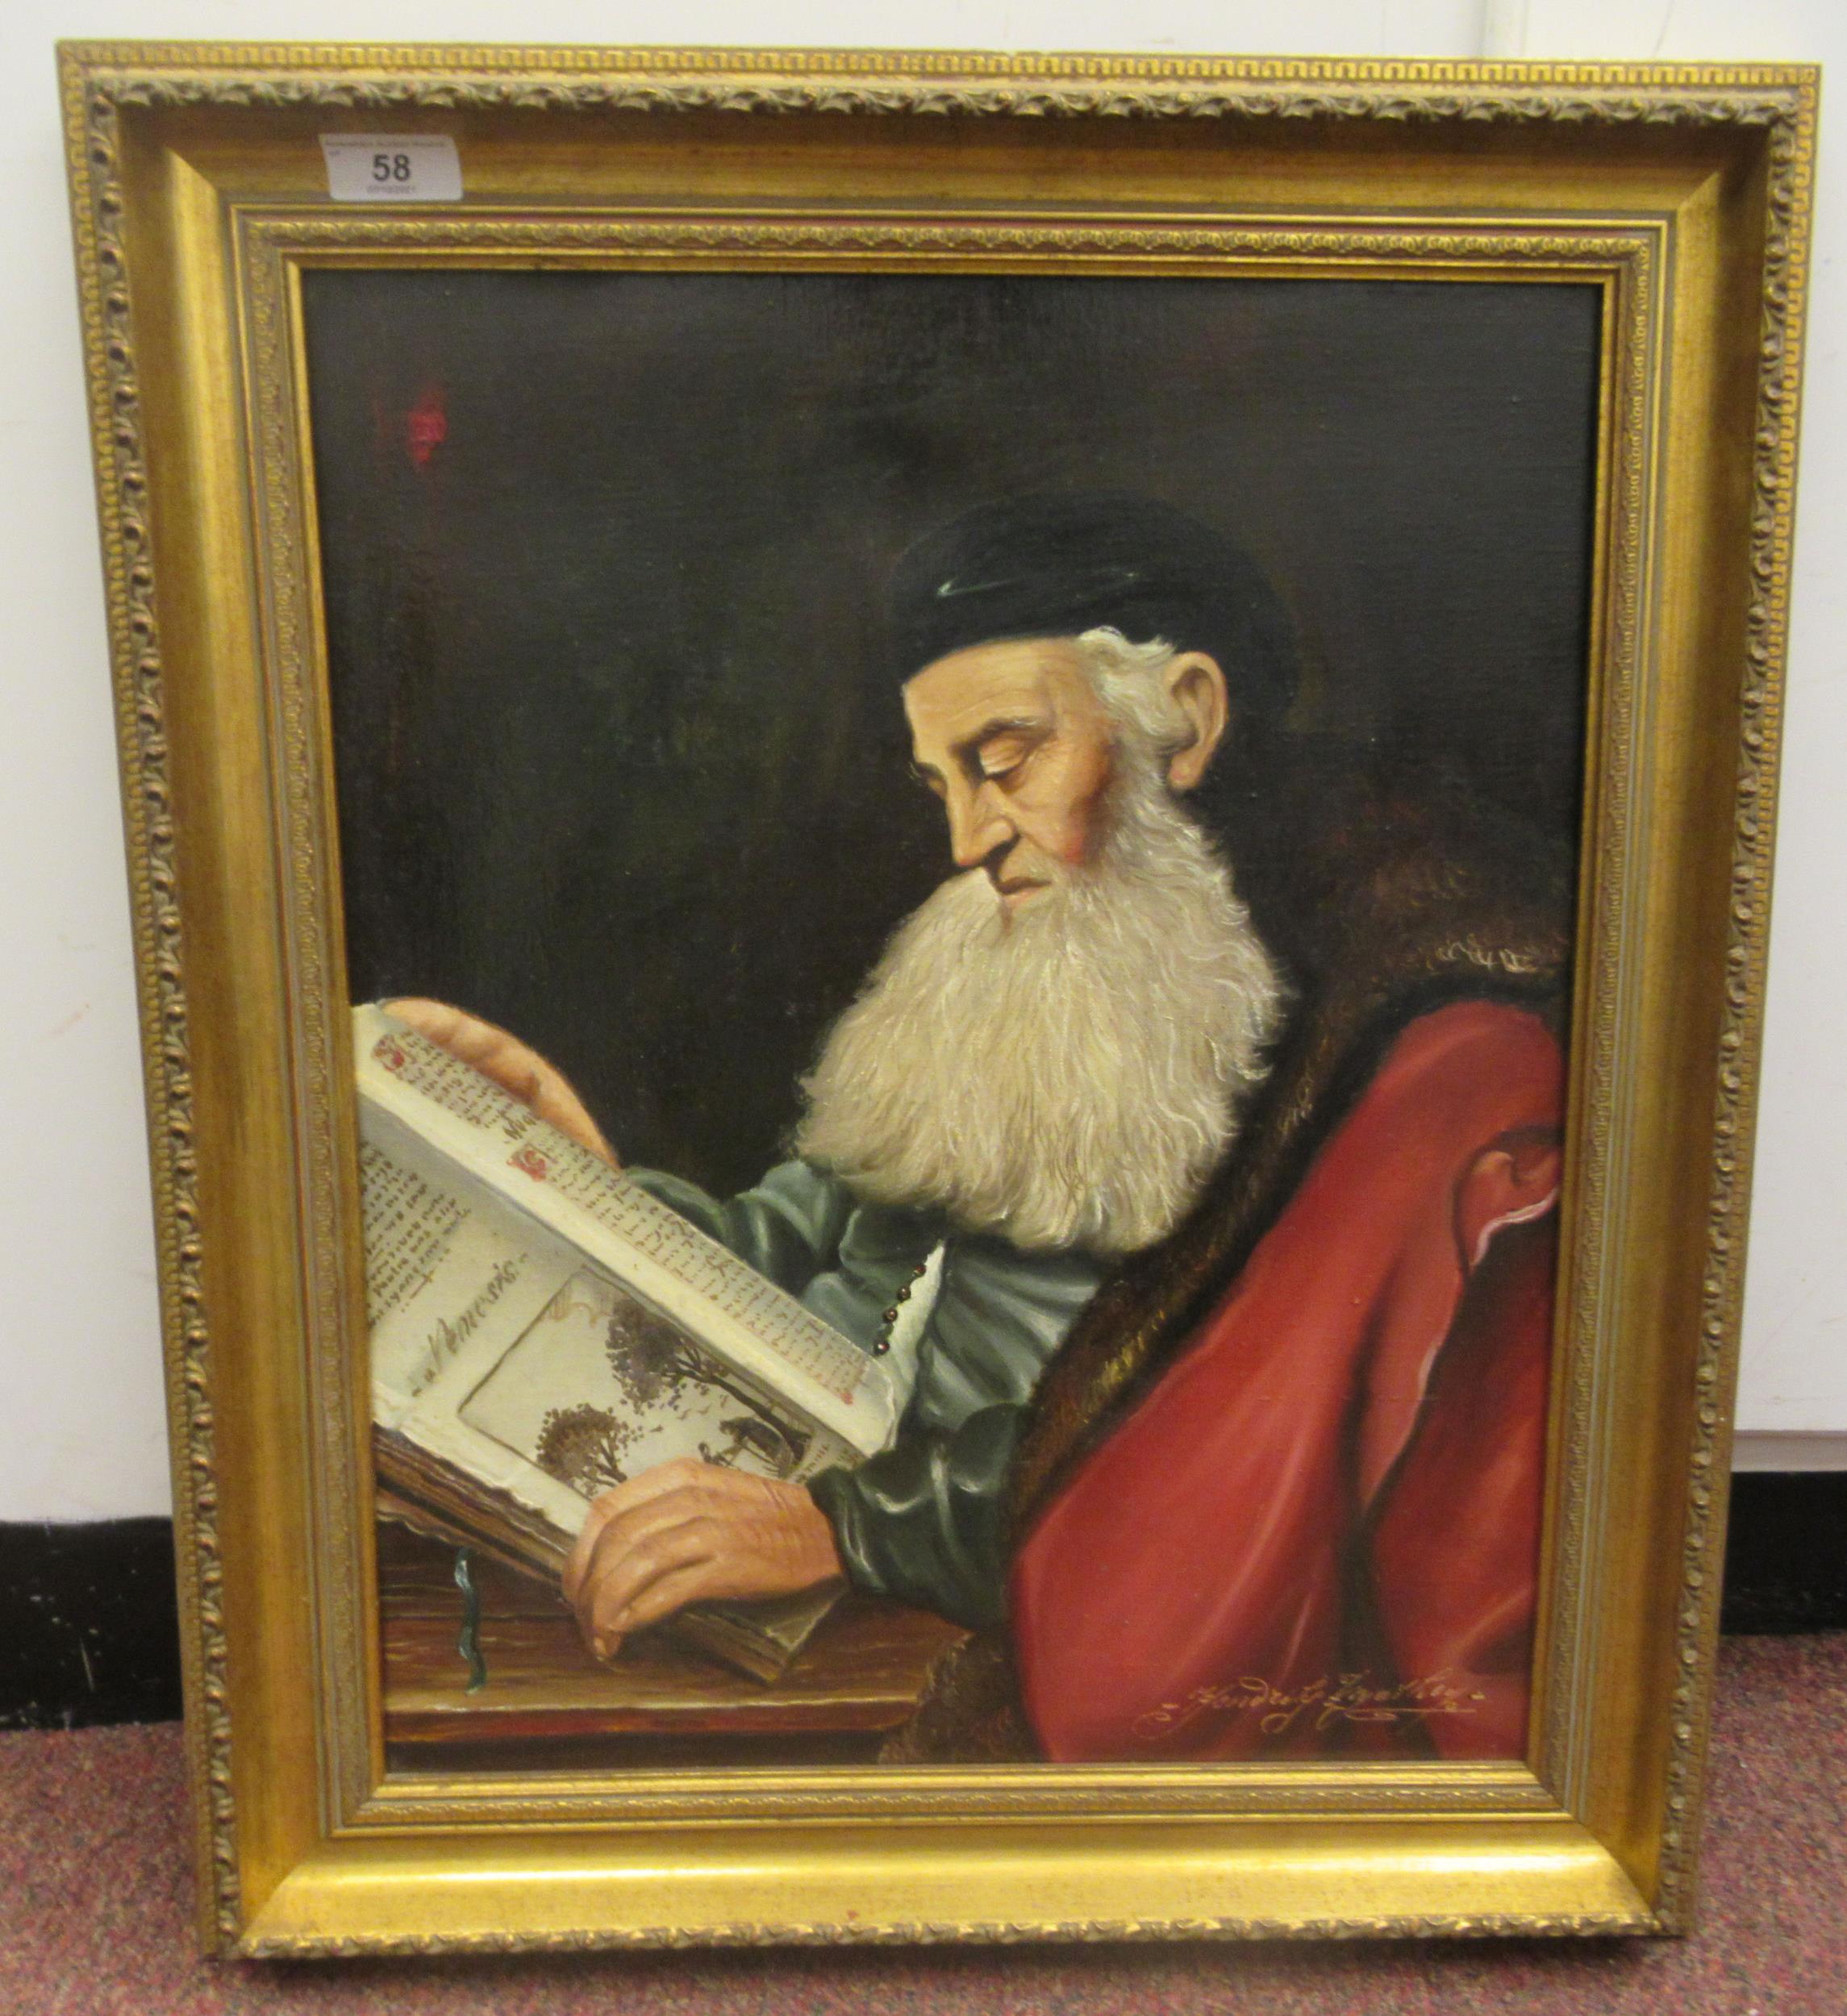 20thC Continental School - a head and shoulders profile portrait, a seated, bearded scholar, reading